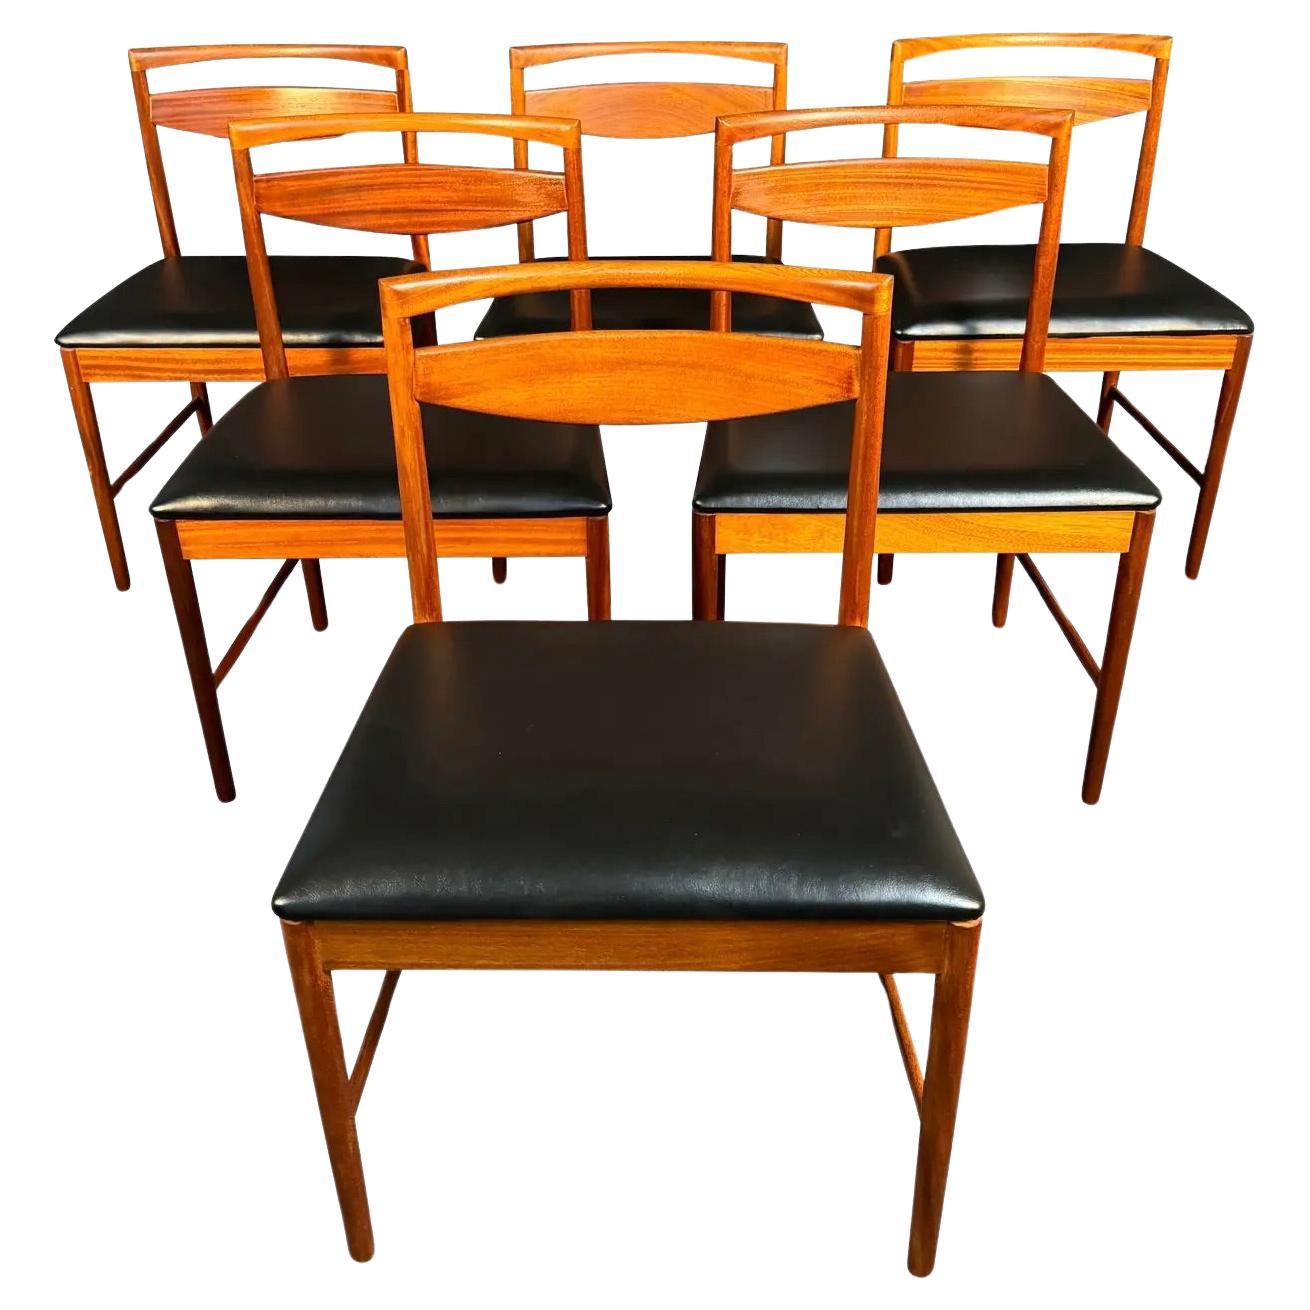 Set of 6 Vintage British Mid Century Modern Mahogany Dining Chairs by McIntosh For Sale